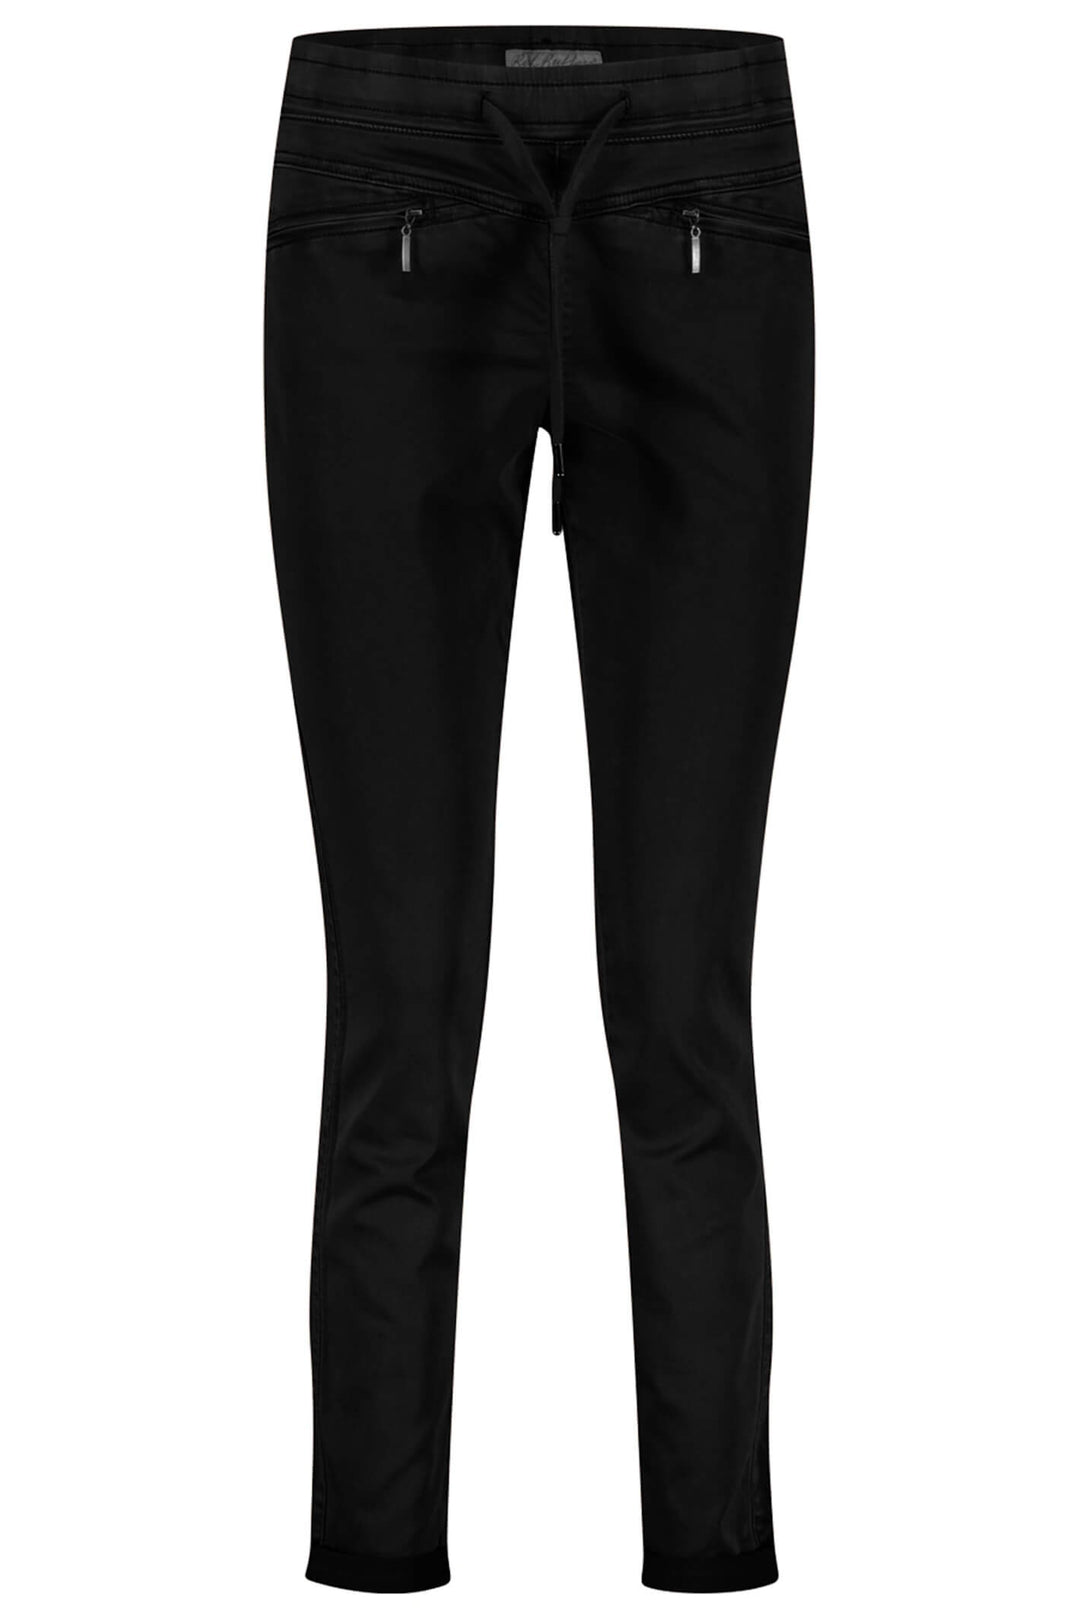 Red Button SRB3071 Tessy Jog Black Pull-On Trousers - Dotique